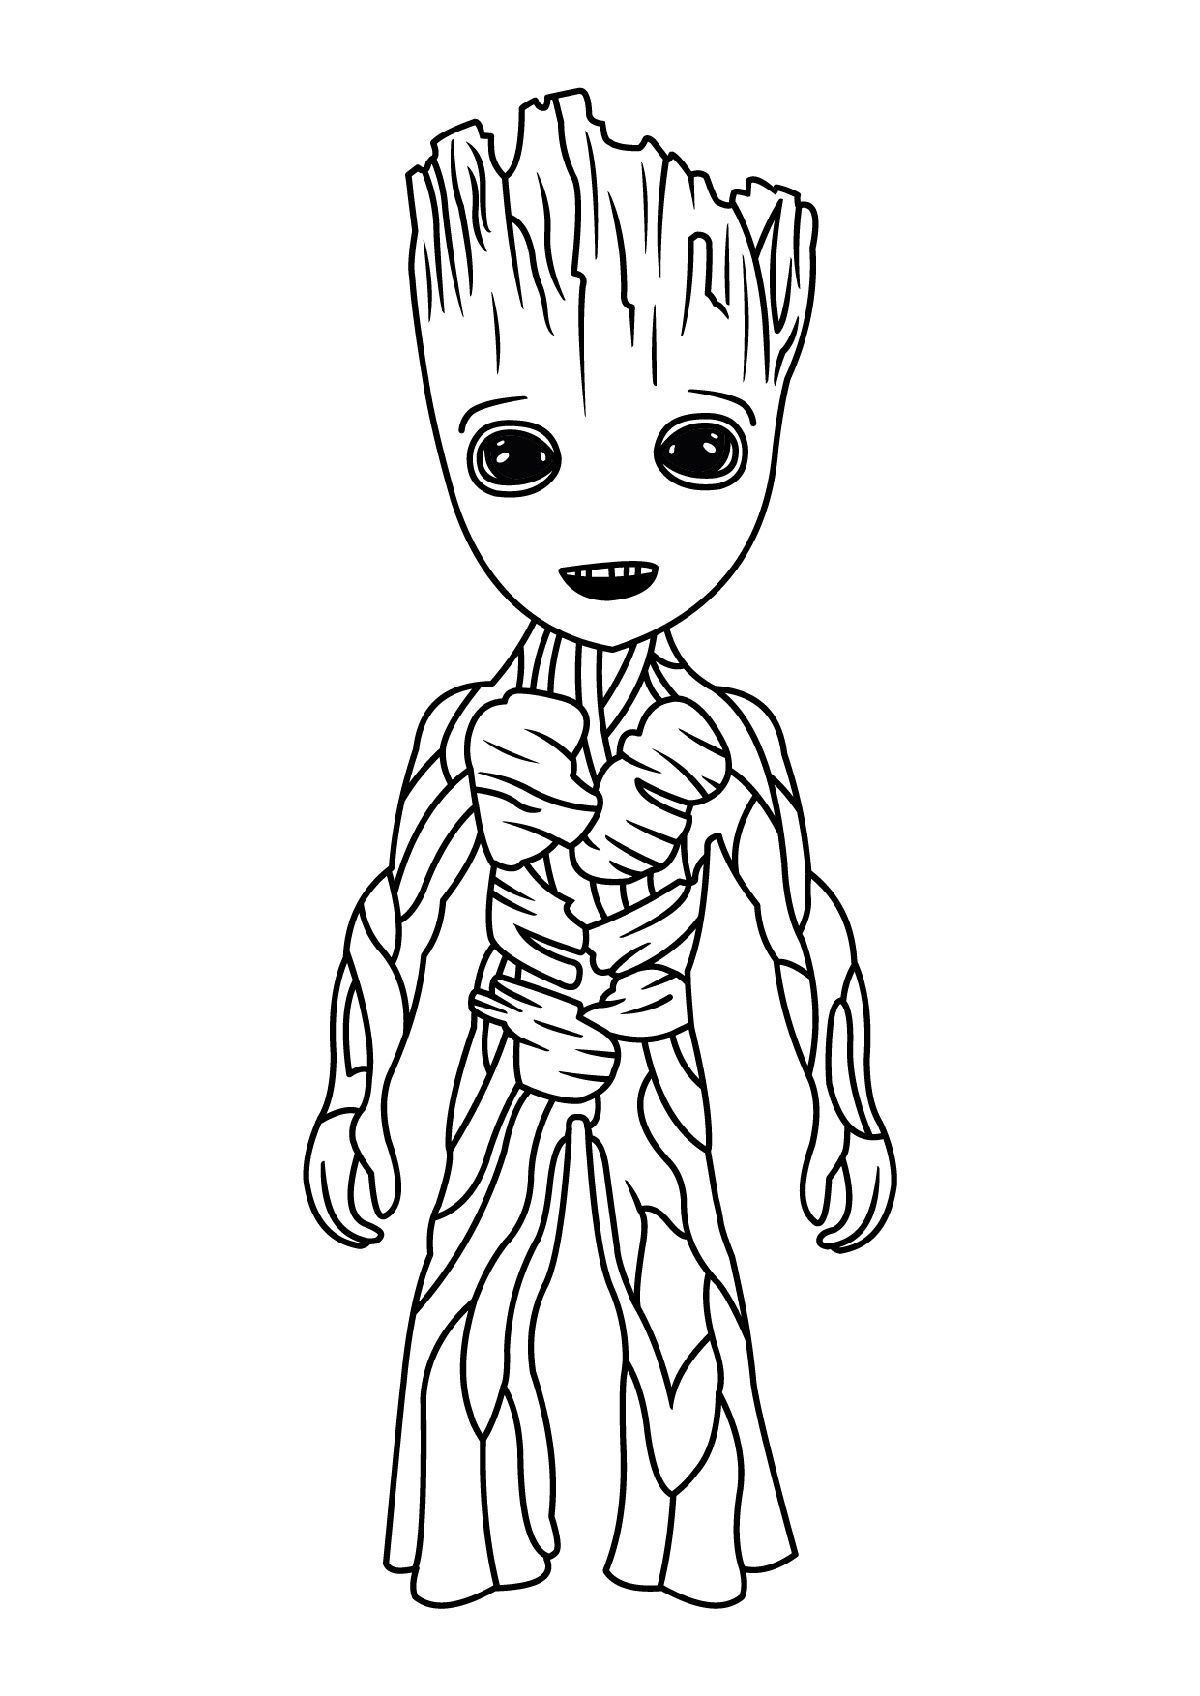 Baby Groot Coloring Page Printable | K5 ...pinterest.com